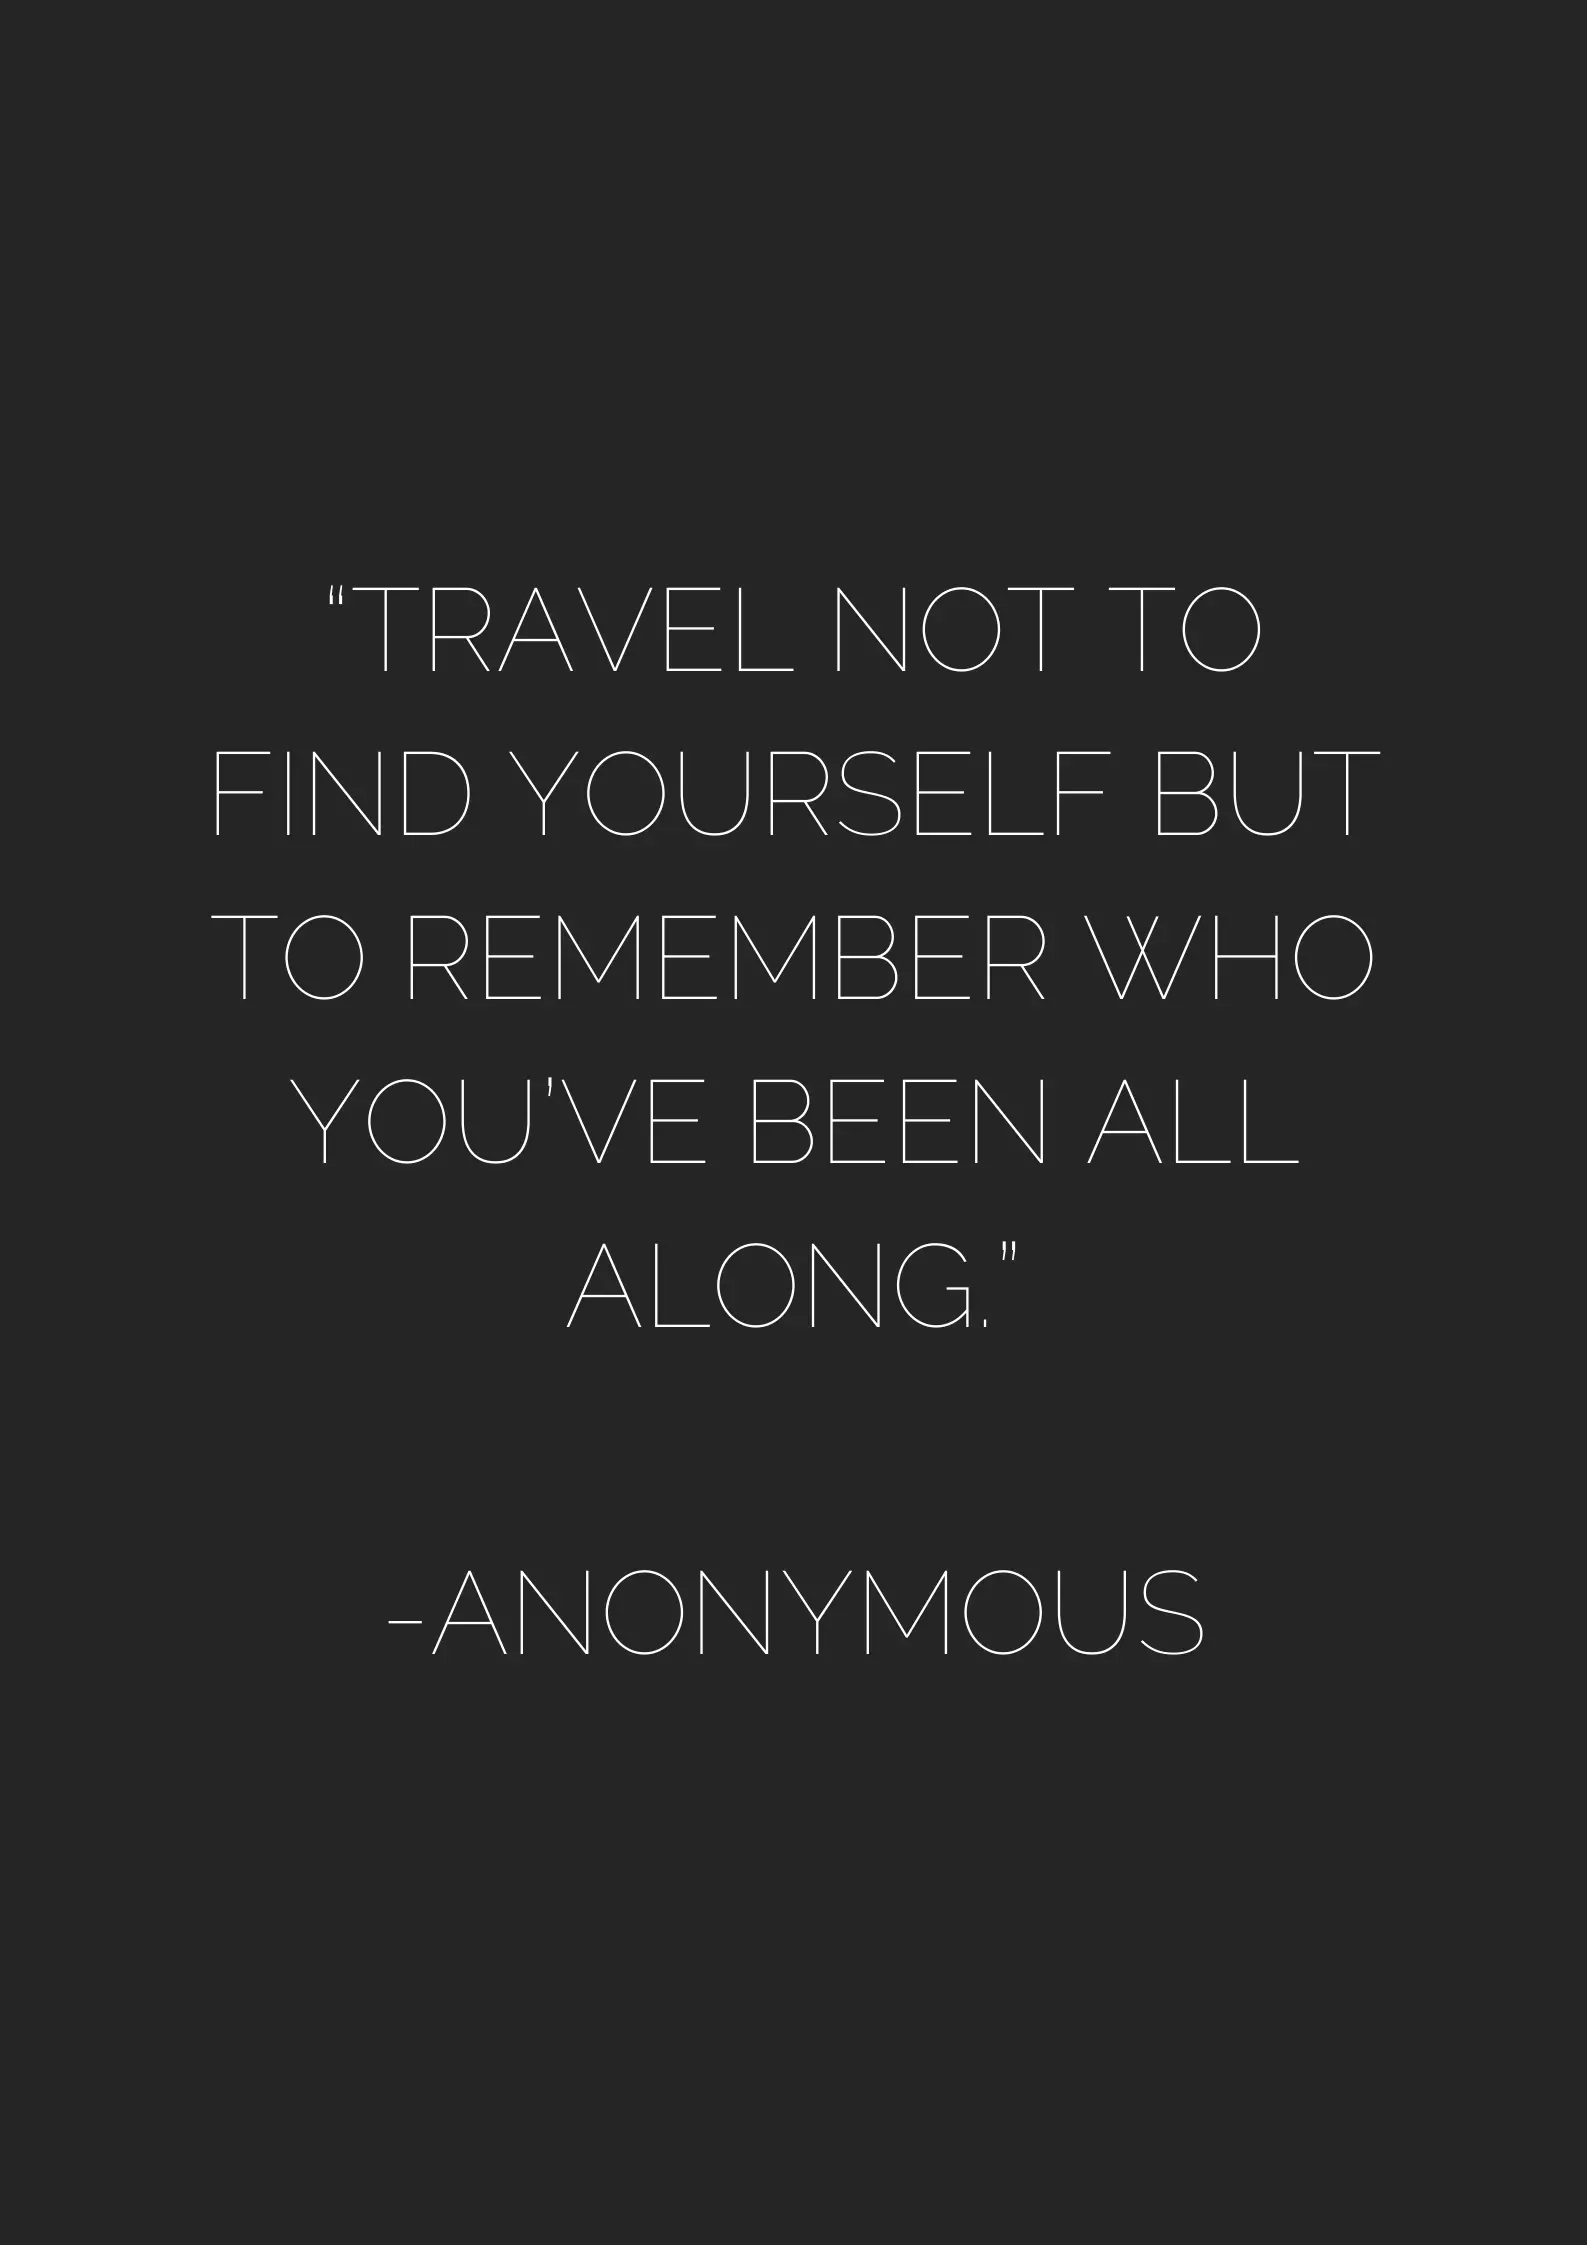 Inspirational Travel Quotes That Are Short Funny And Famous Museuly